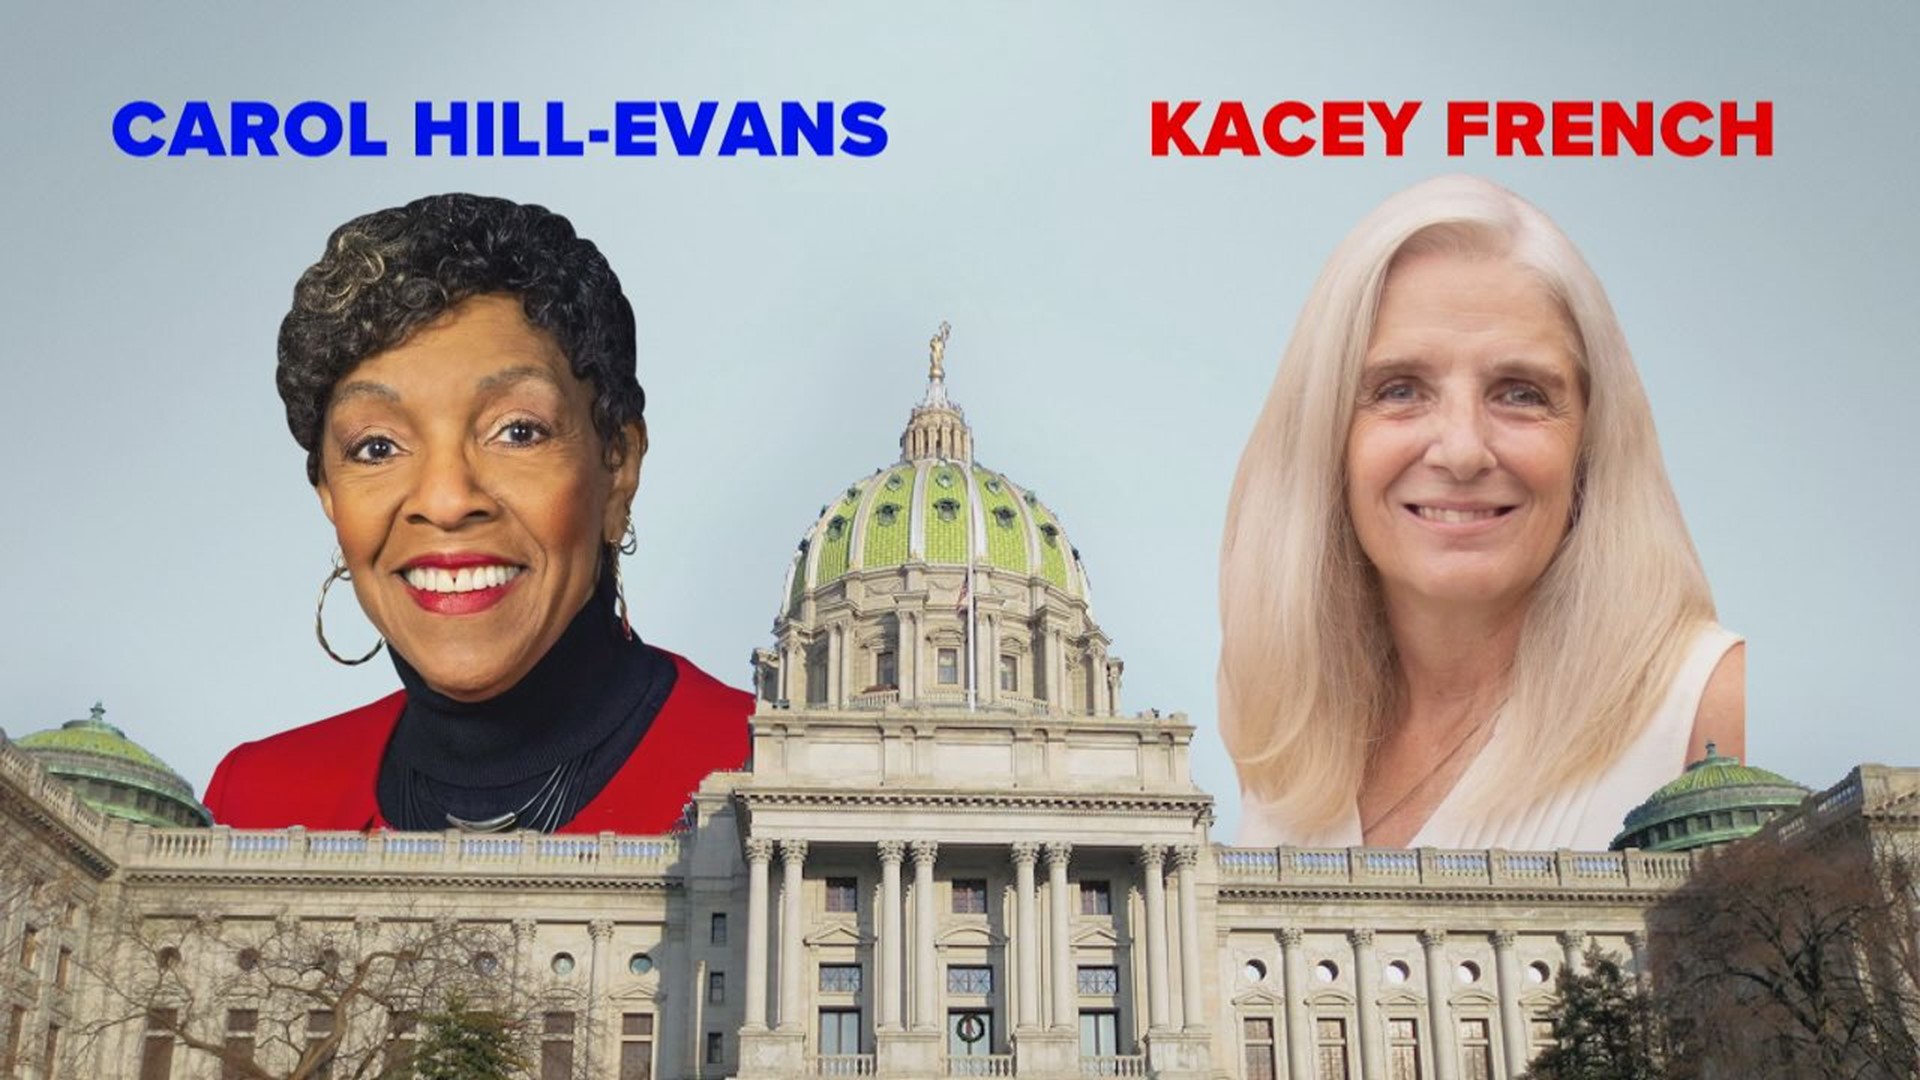 Carol Hill-Evans is seeking a third term representing York City, facing Kacey French who is looking to become the first GOP to win the area since 1984.